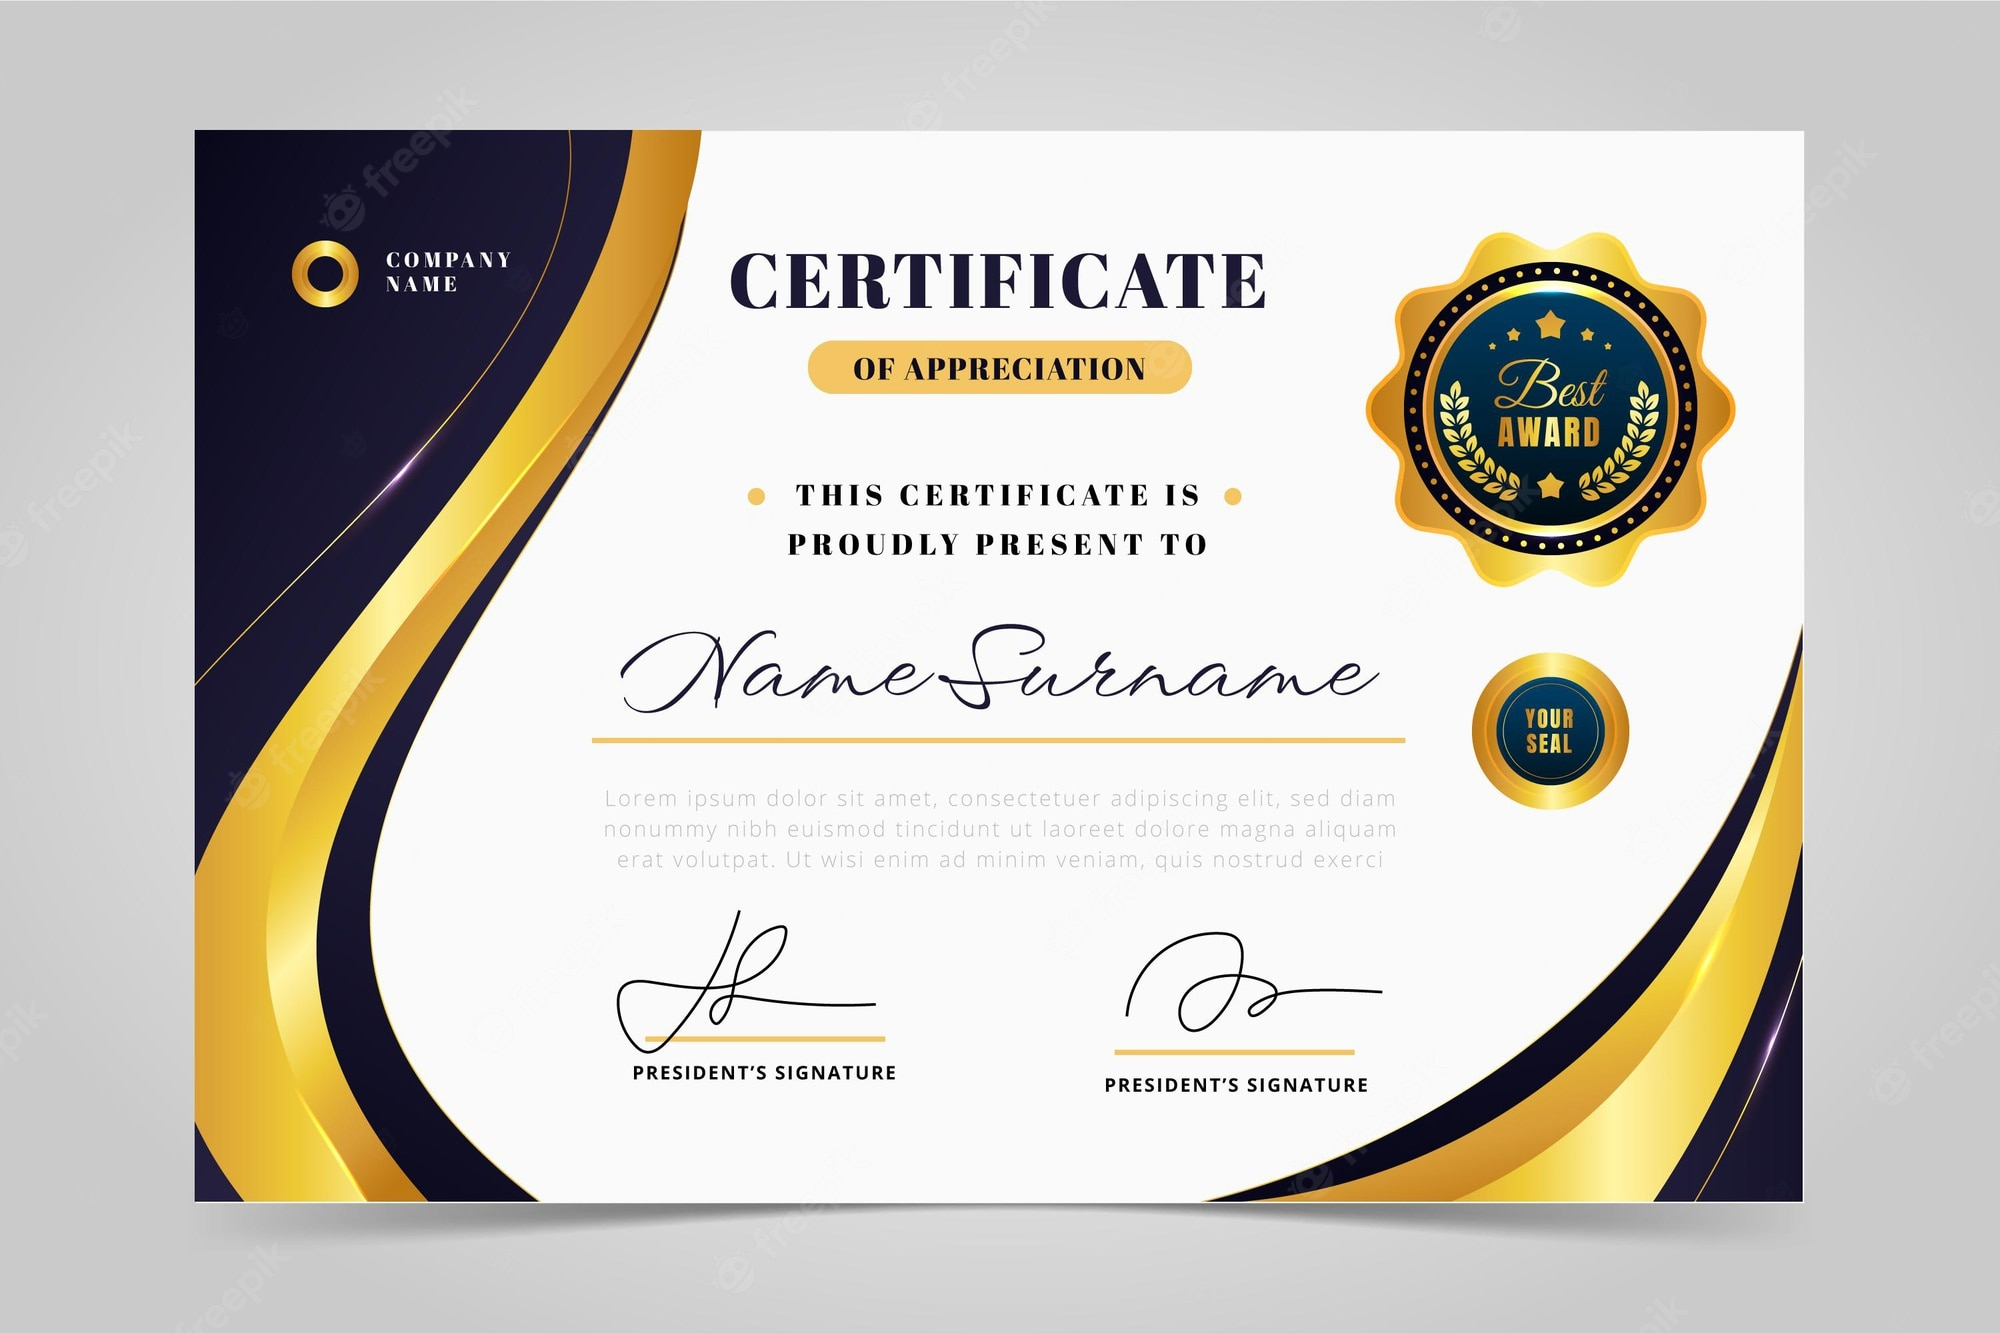 Employee Certificate Images  Free Vectors, Stock Photos & PSD Intended For Employee Of The Year Certificate Template Free